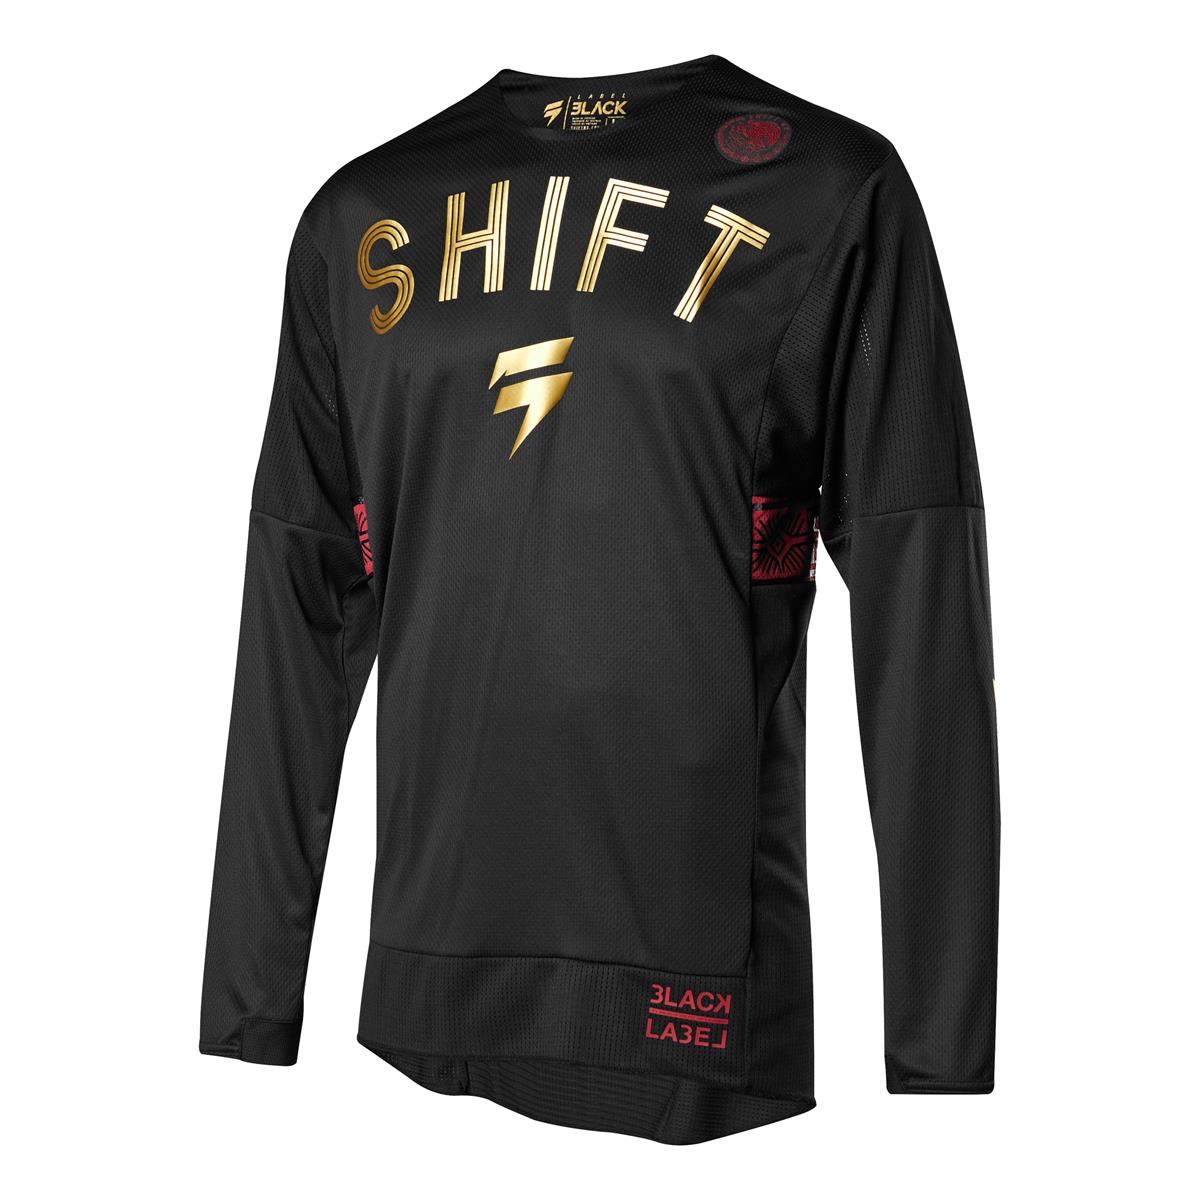 Shift Maillot MX 3lack Label Black/Red - Special Edition Muerte